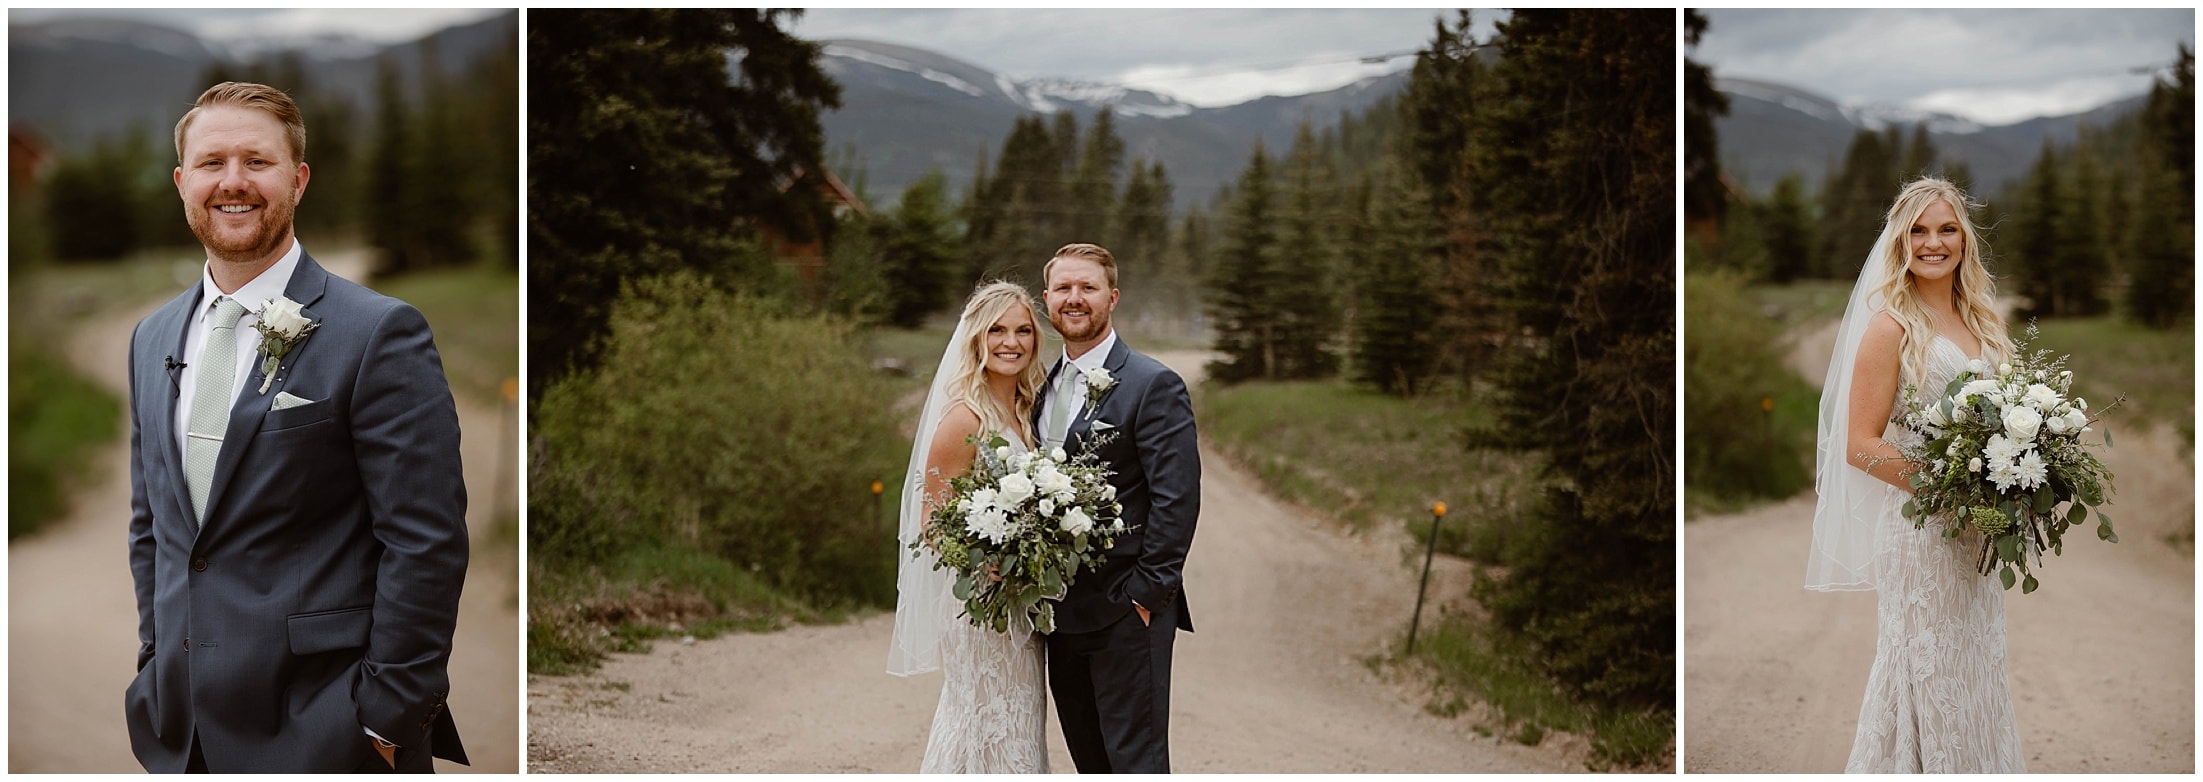 bride and groom in the mountains, Aspen Lodge, Red River New Mexico, Red River New Mexico Wedding, Weddings in New Mexico, Destination mountain wedding, destination mountain elopement, elopements in new mexico, places to get married in new mexico, destination elopement photographer, mountain wedding photographer, new mexico wedding photographer, new mexico elopement photographer, brit nicole photography, cabin wedding, new mexico cabin wedding, mountain landscape for wedding, small intimate mountain wedding, small intimate river wedding, wedding photographer in new mexico, junebug weddings, the knot, wedding wire, 41 productions with lindsay gomez, dallas texas bride, DJ Allen Gallegos, Tao Cakes, New Mexico Wedding planner karen kelly, barnes jewelry, Lillian West bridal dress, Lang’s Bridal, enchanted florist wedding flowers, places to get married in texas, texas wedding photographer, texas elopement photographer, forest wedding, forest elopement, wooded area for wedding, wooded elopement, elopement in the woods, amarillo wedding photographer, amarillo elopement photographer